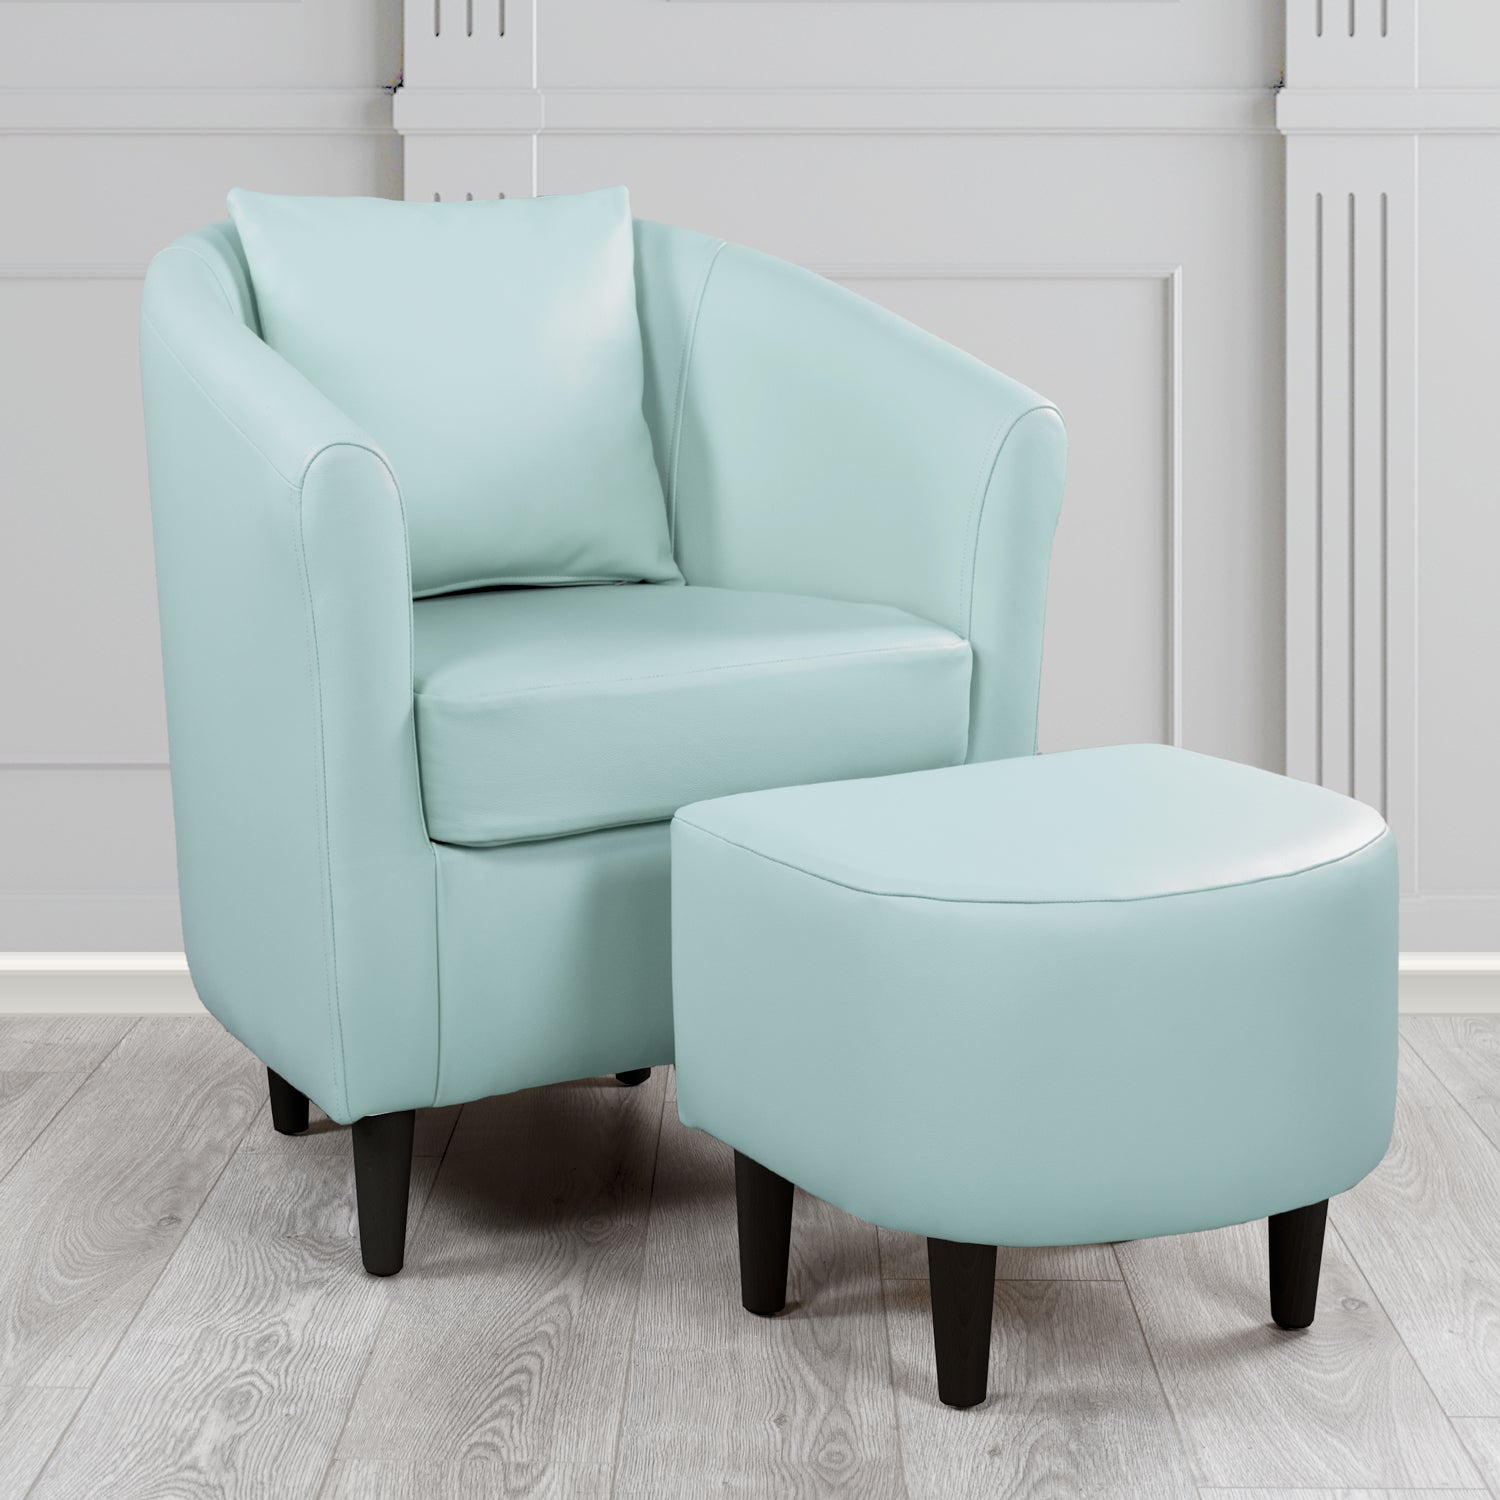 St Tropez Shelly Parlour Blue Crib 5 Genuine Leather Tub Chair & Footstool Set With Scatter Cushion (6619511390250)